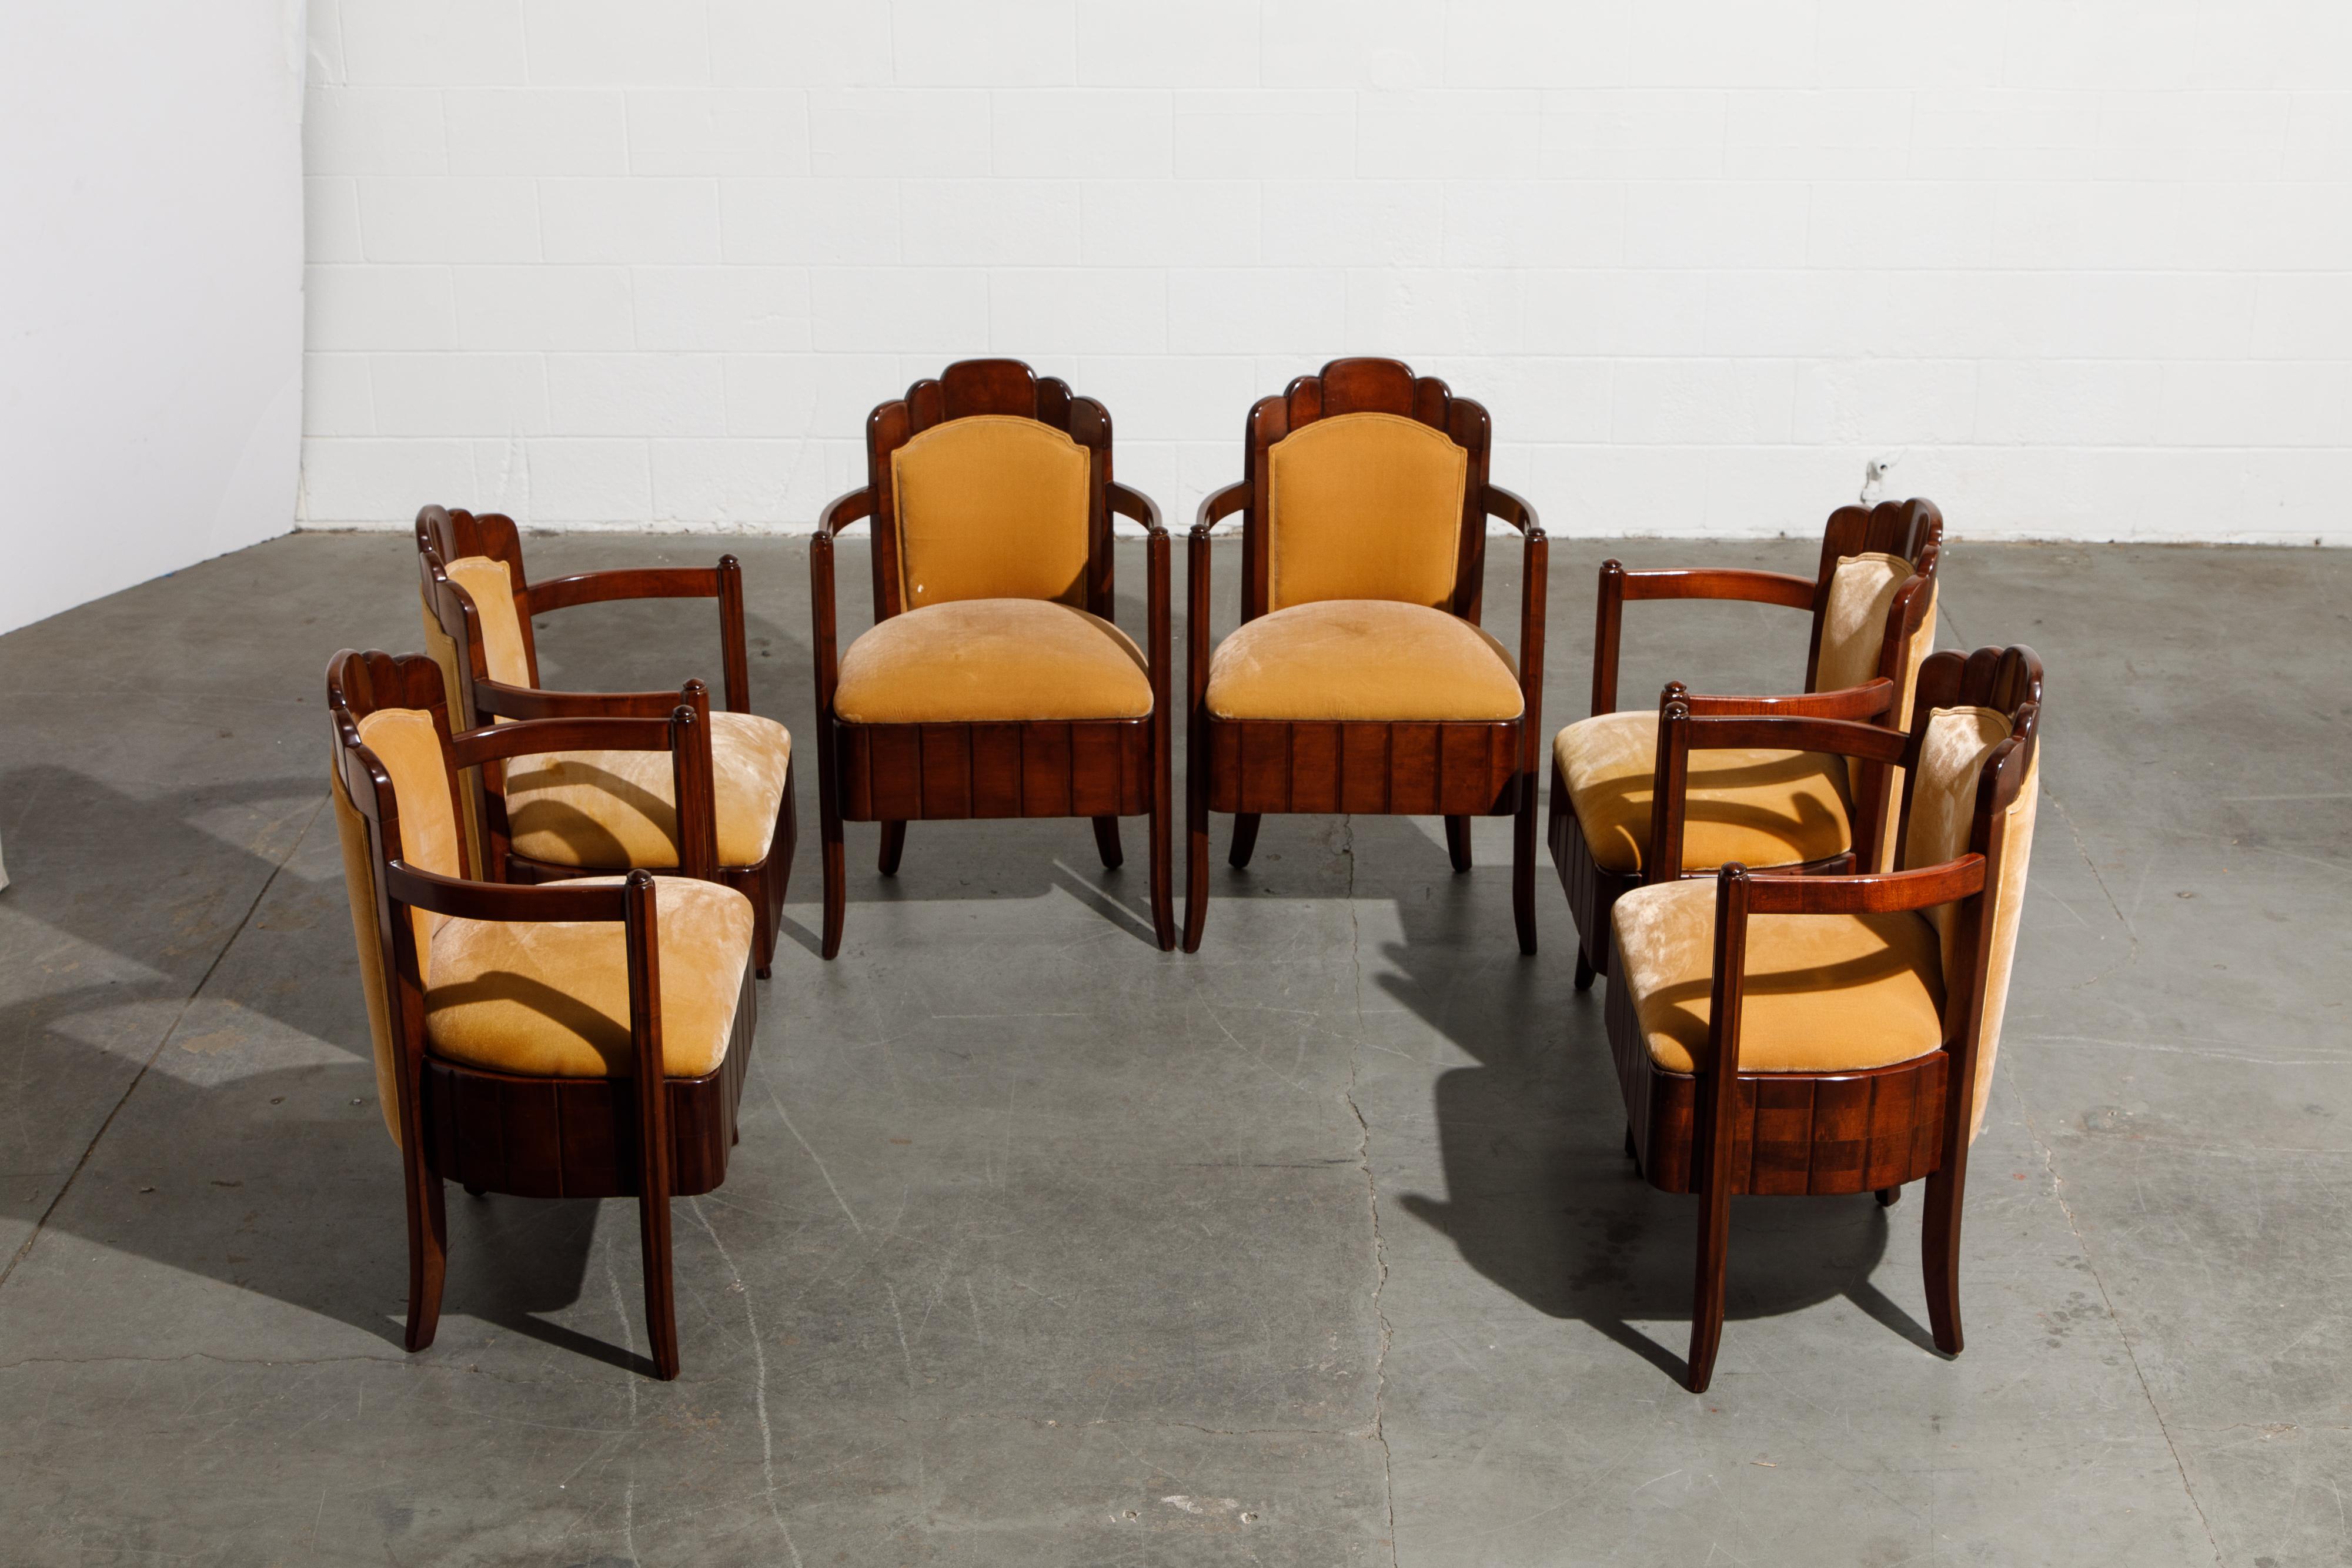 Important Pierre Patout Mahogany Dining Chairs from S.S. Île de France, c. 1927 In Good Condition For Sale In Los Angeles, CA